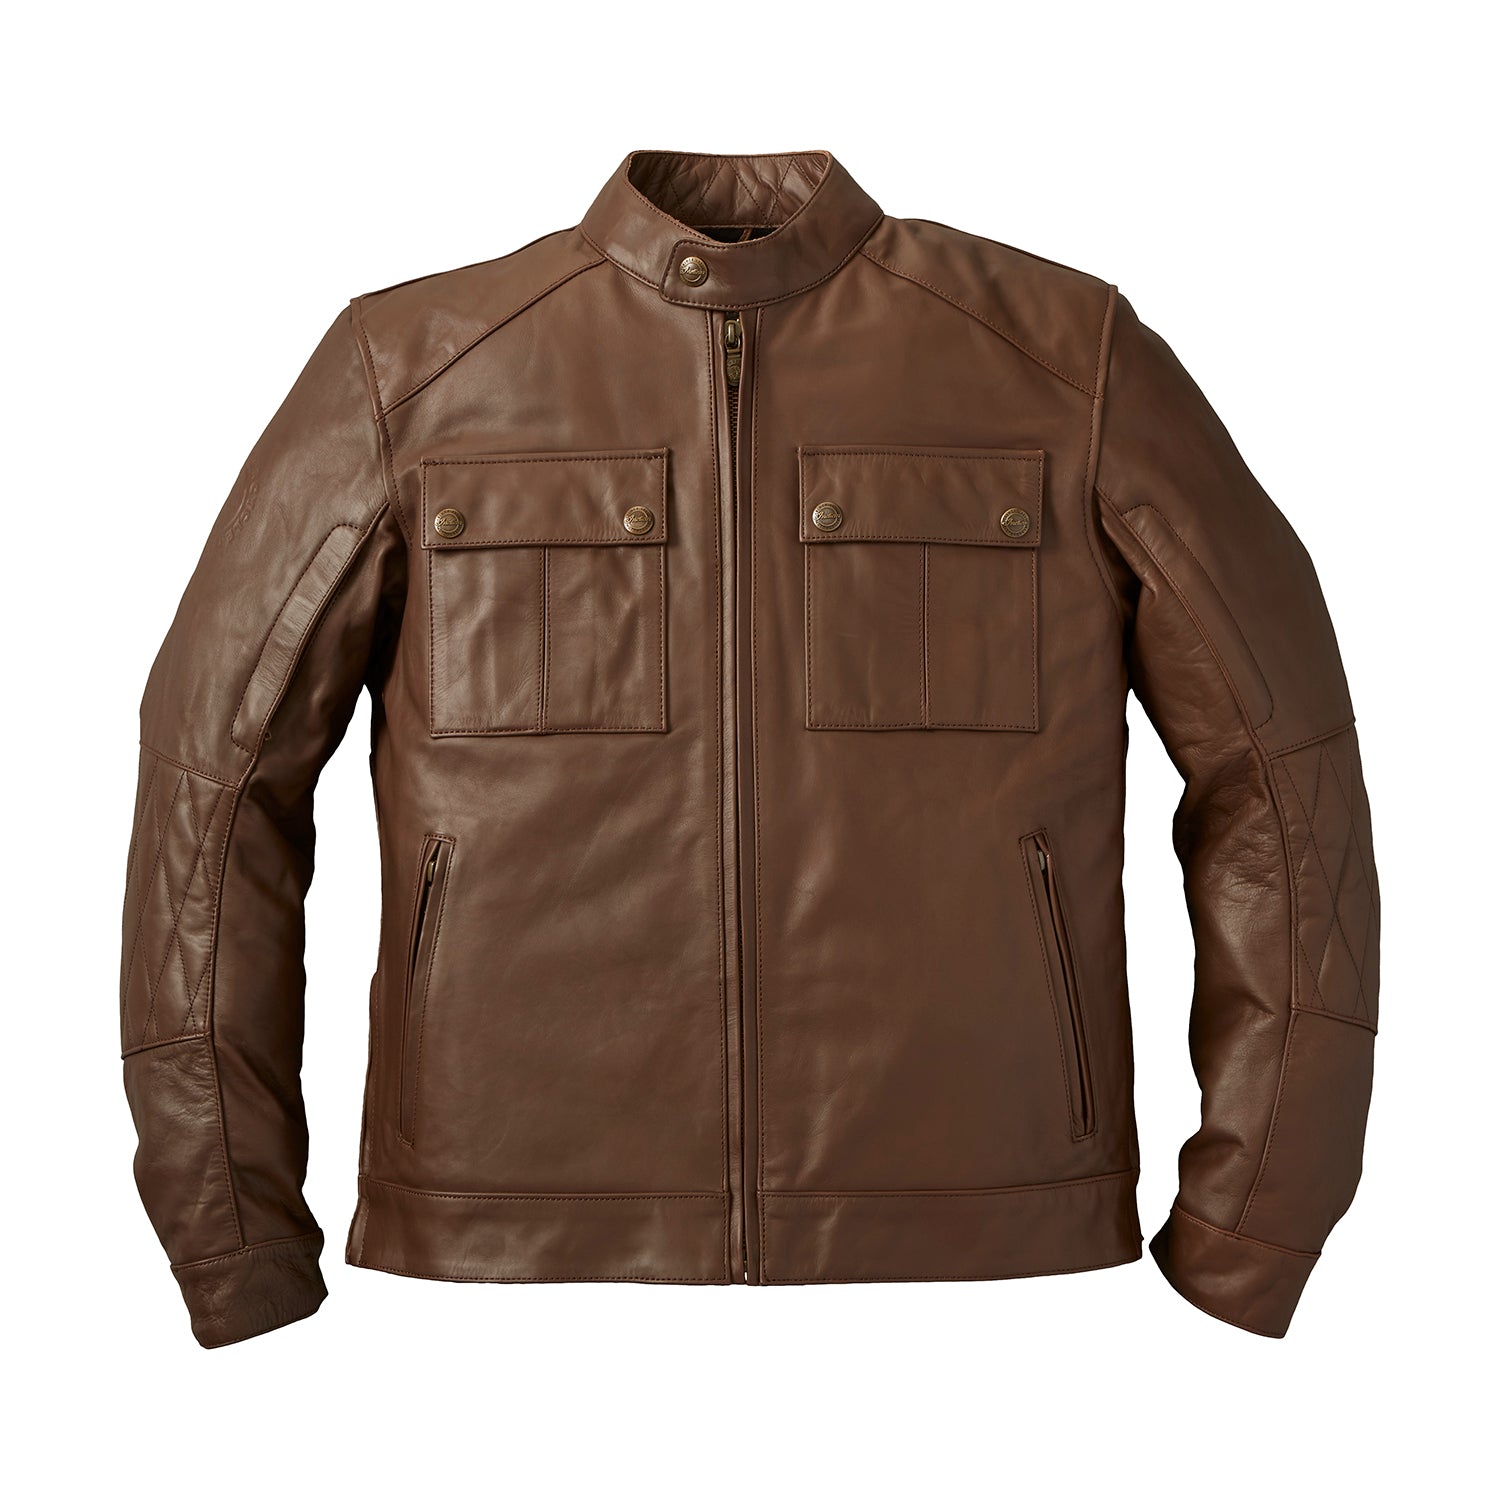 Men's Leather Getaway Riding Jacket with Removable Liner, Brown